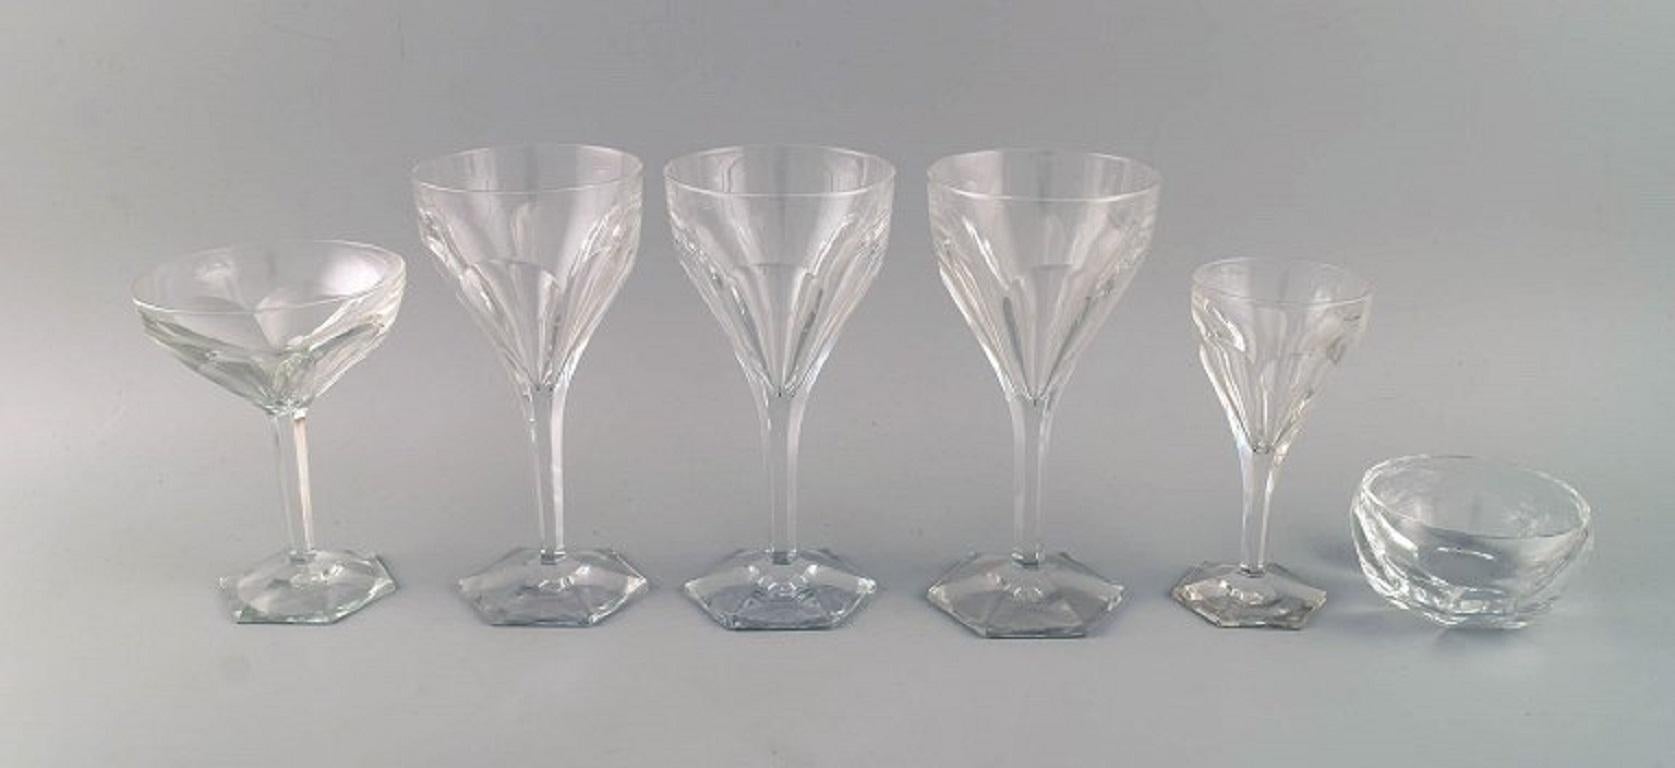 Val St. Lambert, Belgium. Five Lalaing glasses and rinsing bowl in clear mouth-blown crystal glass. 
Mid-20th century.
Three red wine glasses, cherry glass, champagne bowl and rinse bowl.
The champagne bowl measures: 14 x 10.5 cm
The rinsing